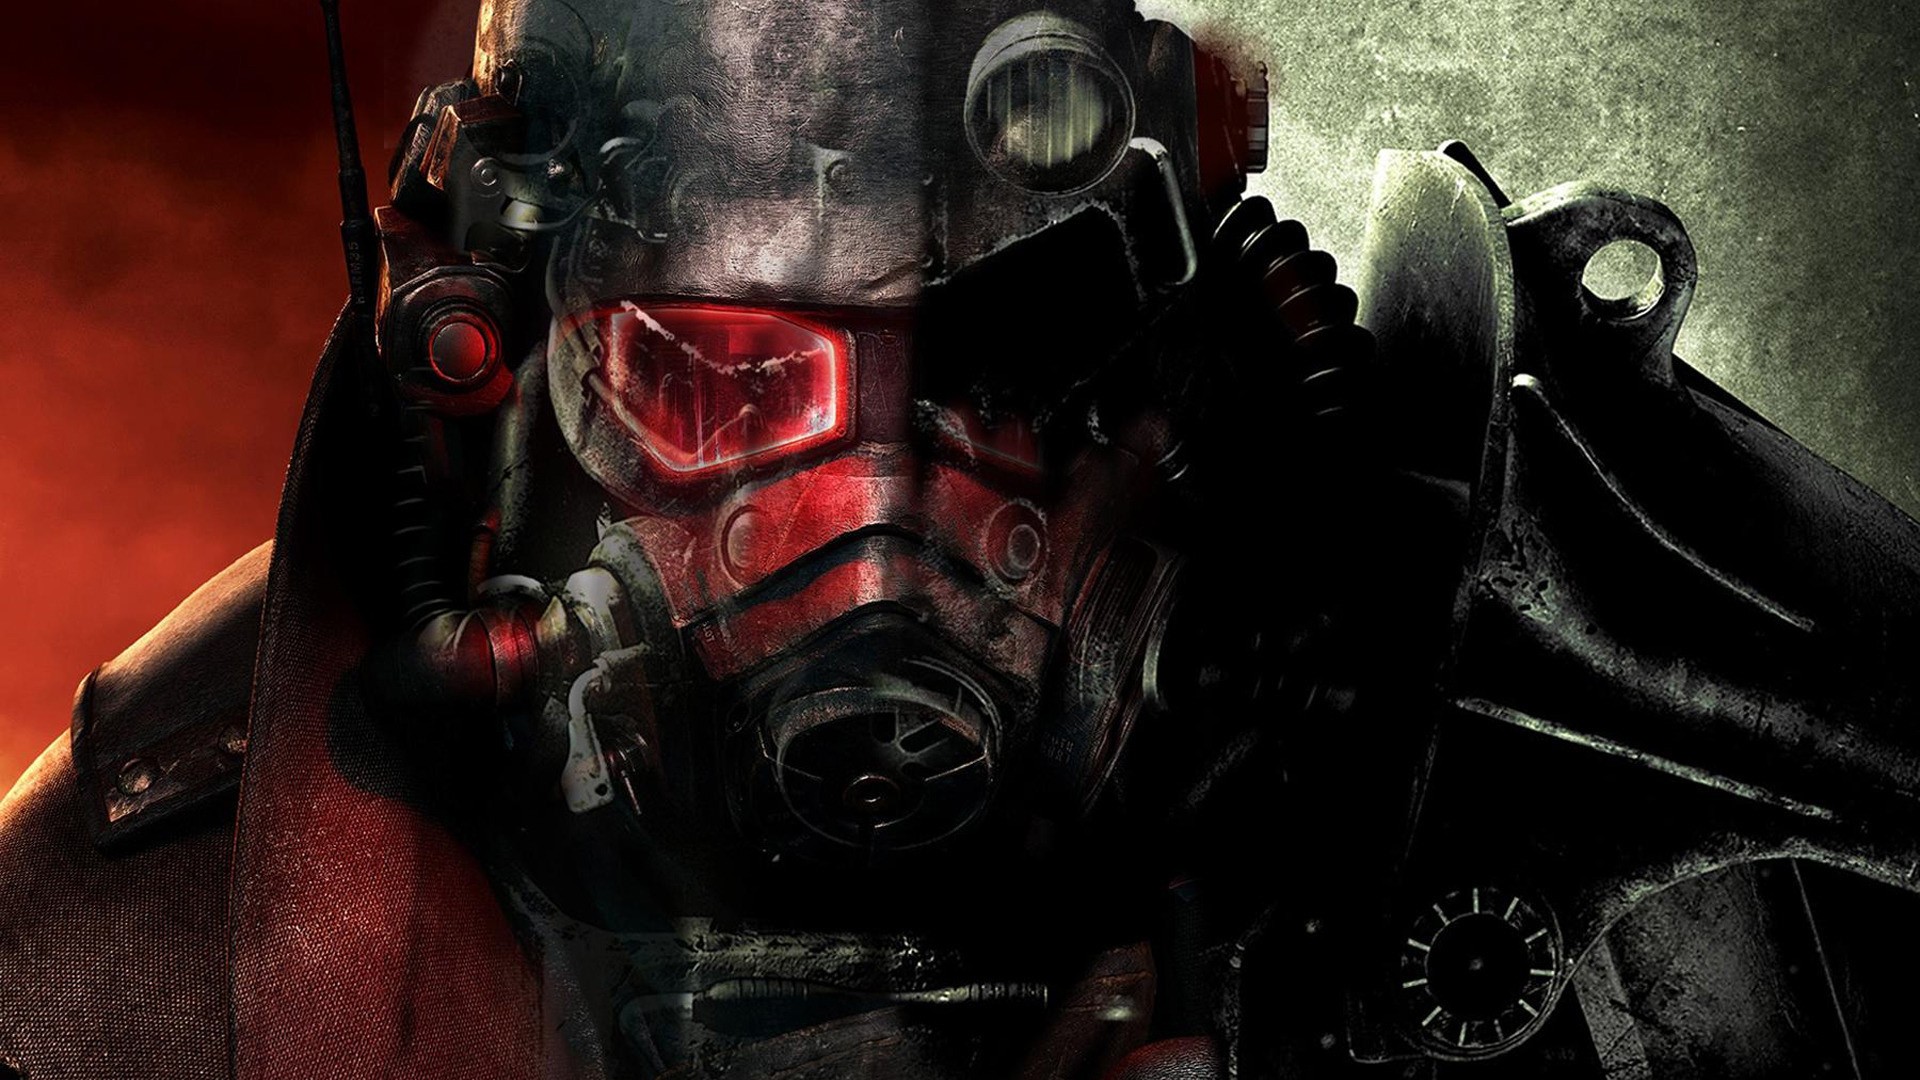 Fallout 4 Wallpaper 1920x1080 ① Download Free Amazing High